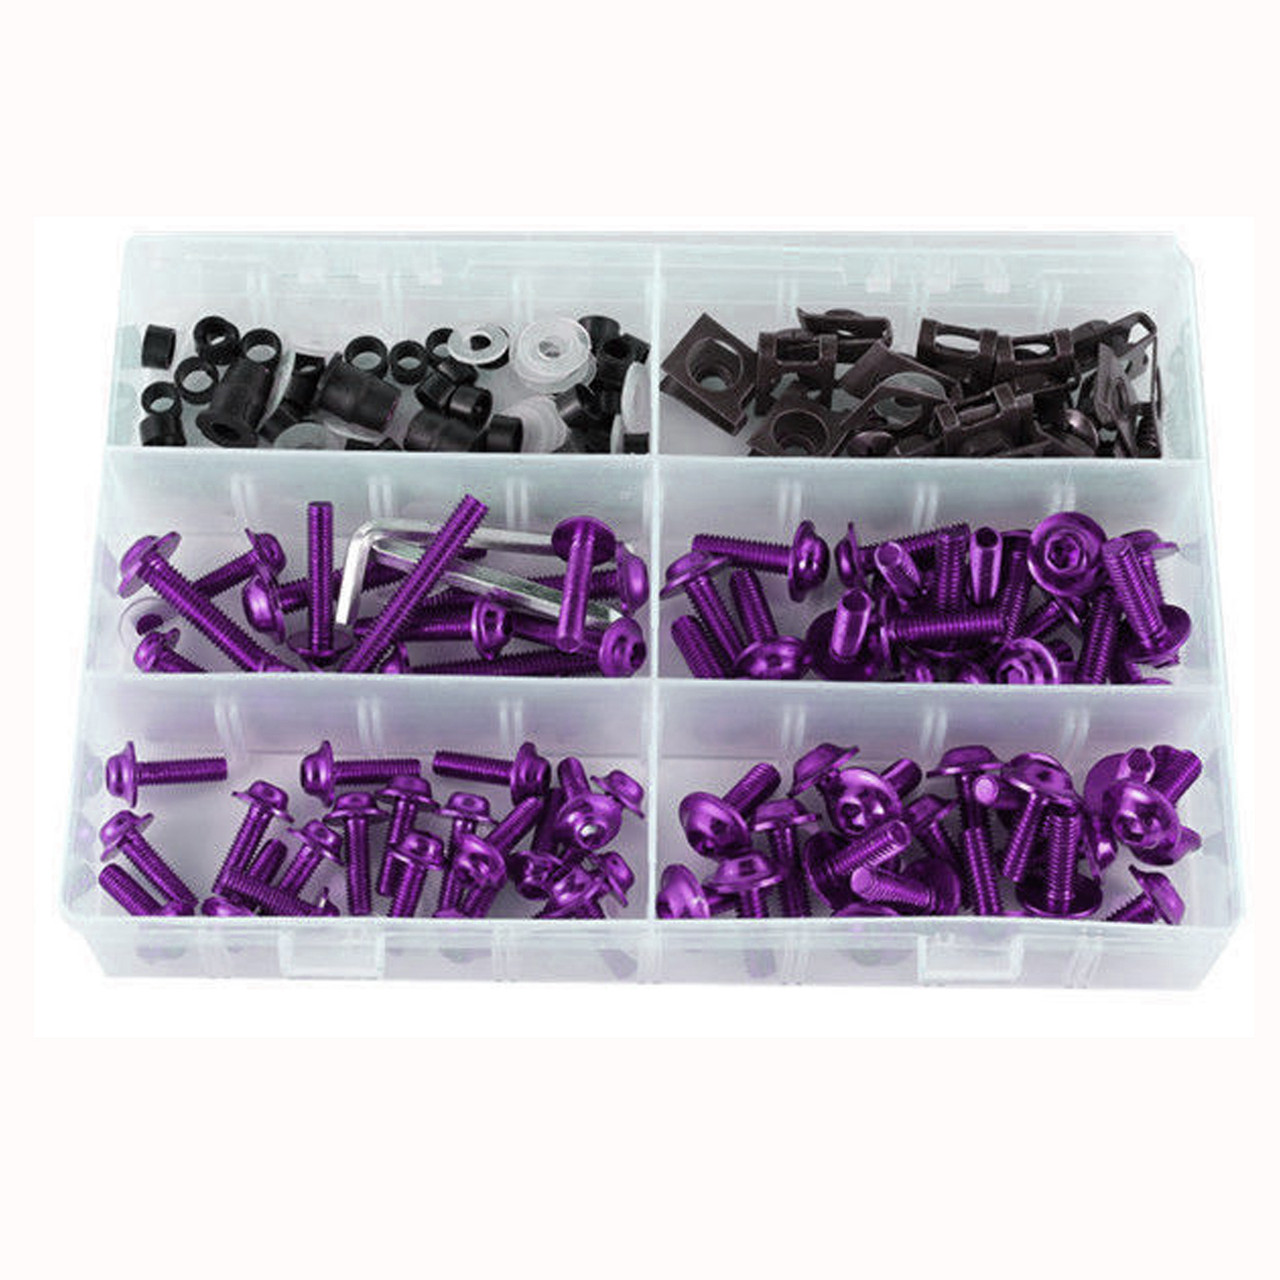 177PCS Motorcycle Sportbike Windscreen Fairing Bolts Kit Fastener Clips Screws Universal Fit For Honda Motorcycle/Motorbikes/Sportbikes/Scooter/Streetbikes PUR~BC1